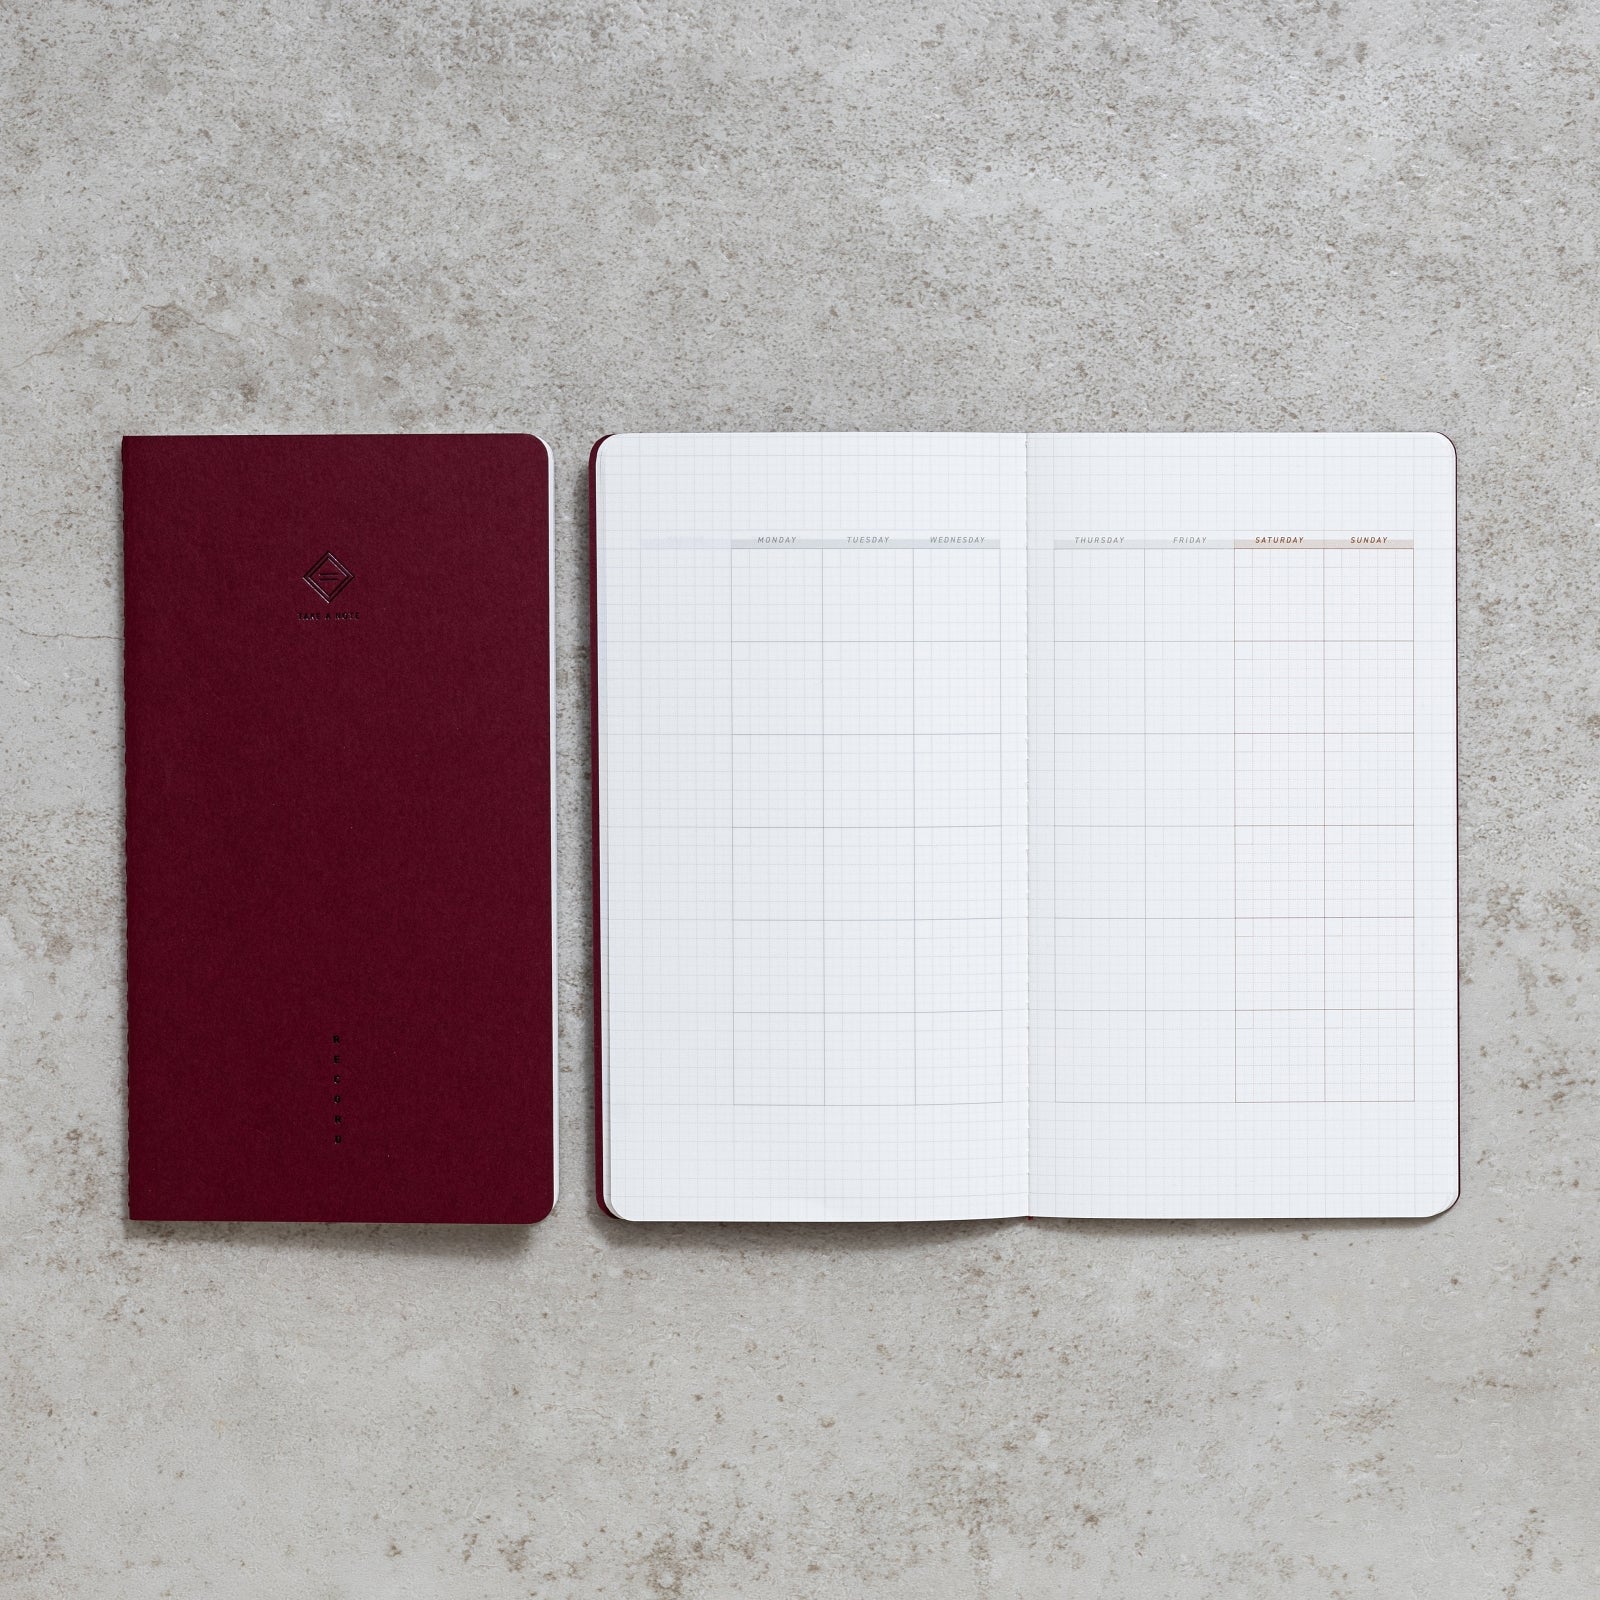 "RECORD" - LITE Undated Monthly Planner